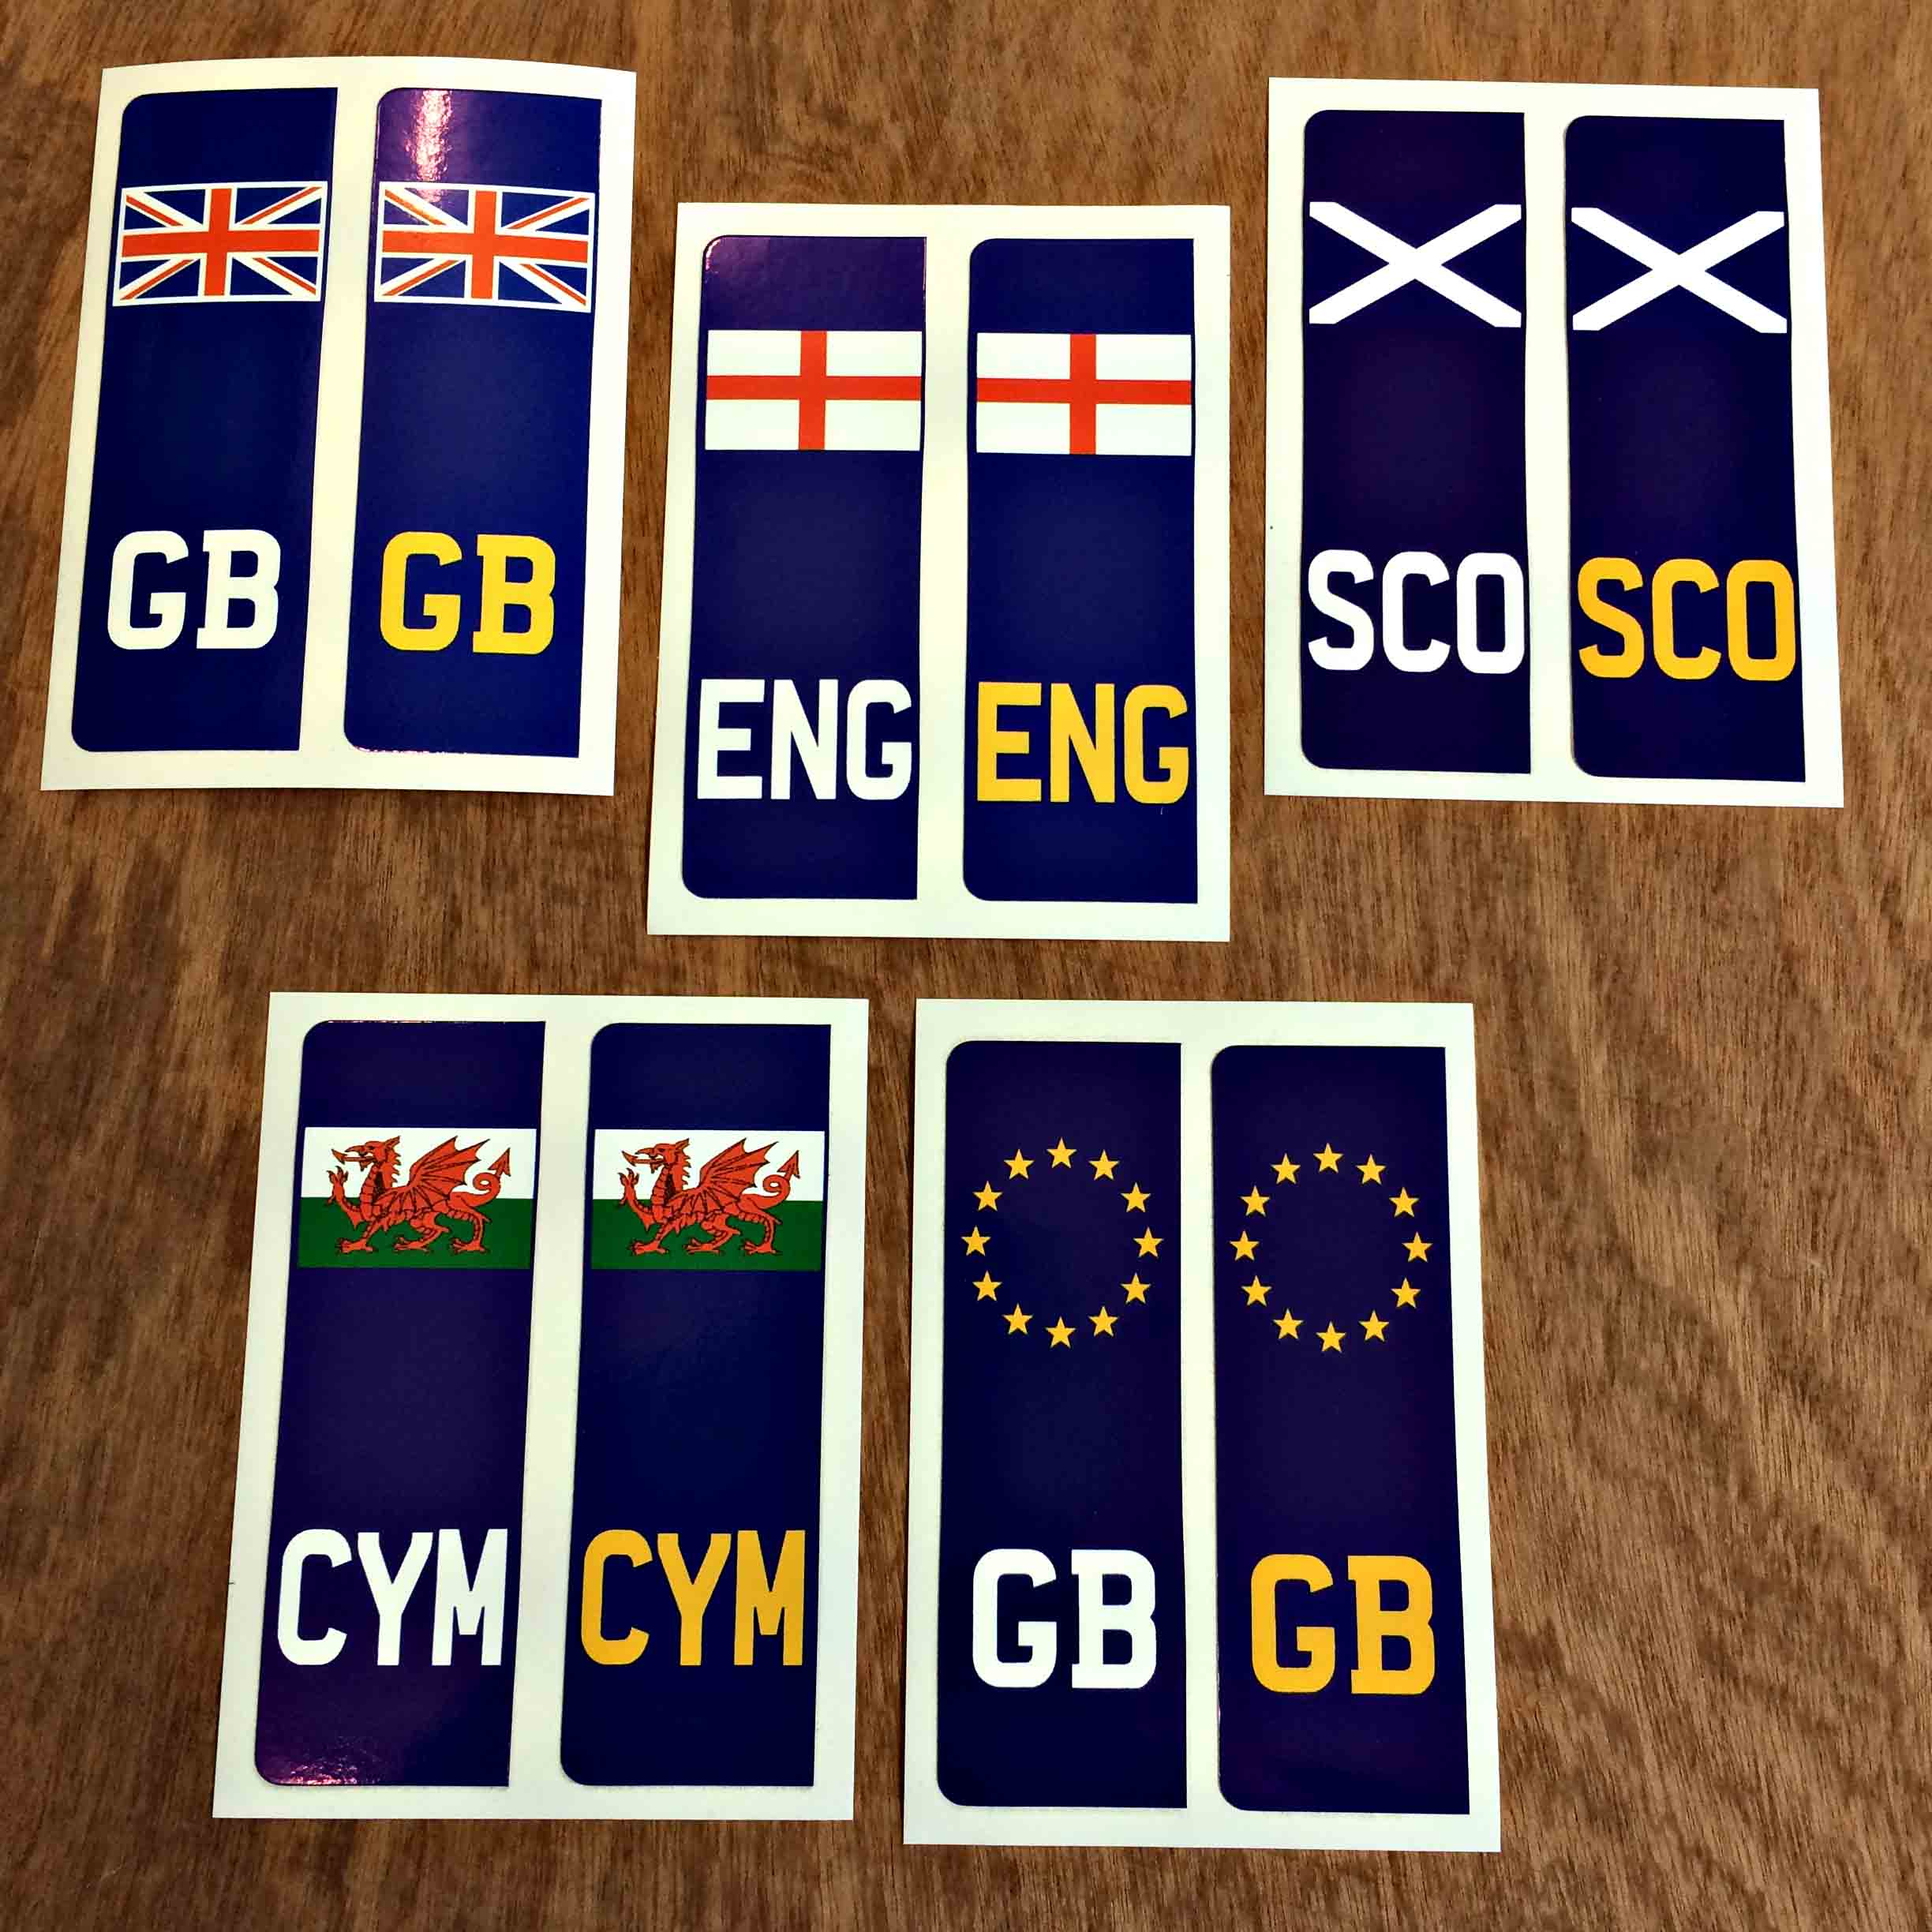 A blue column. Top is the country flag. Bottom is GB, ENG, SCO or CYM. The lettering is white and yellow.